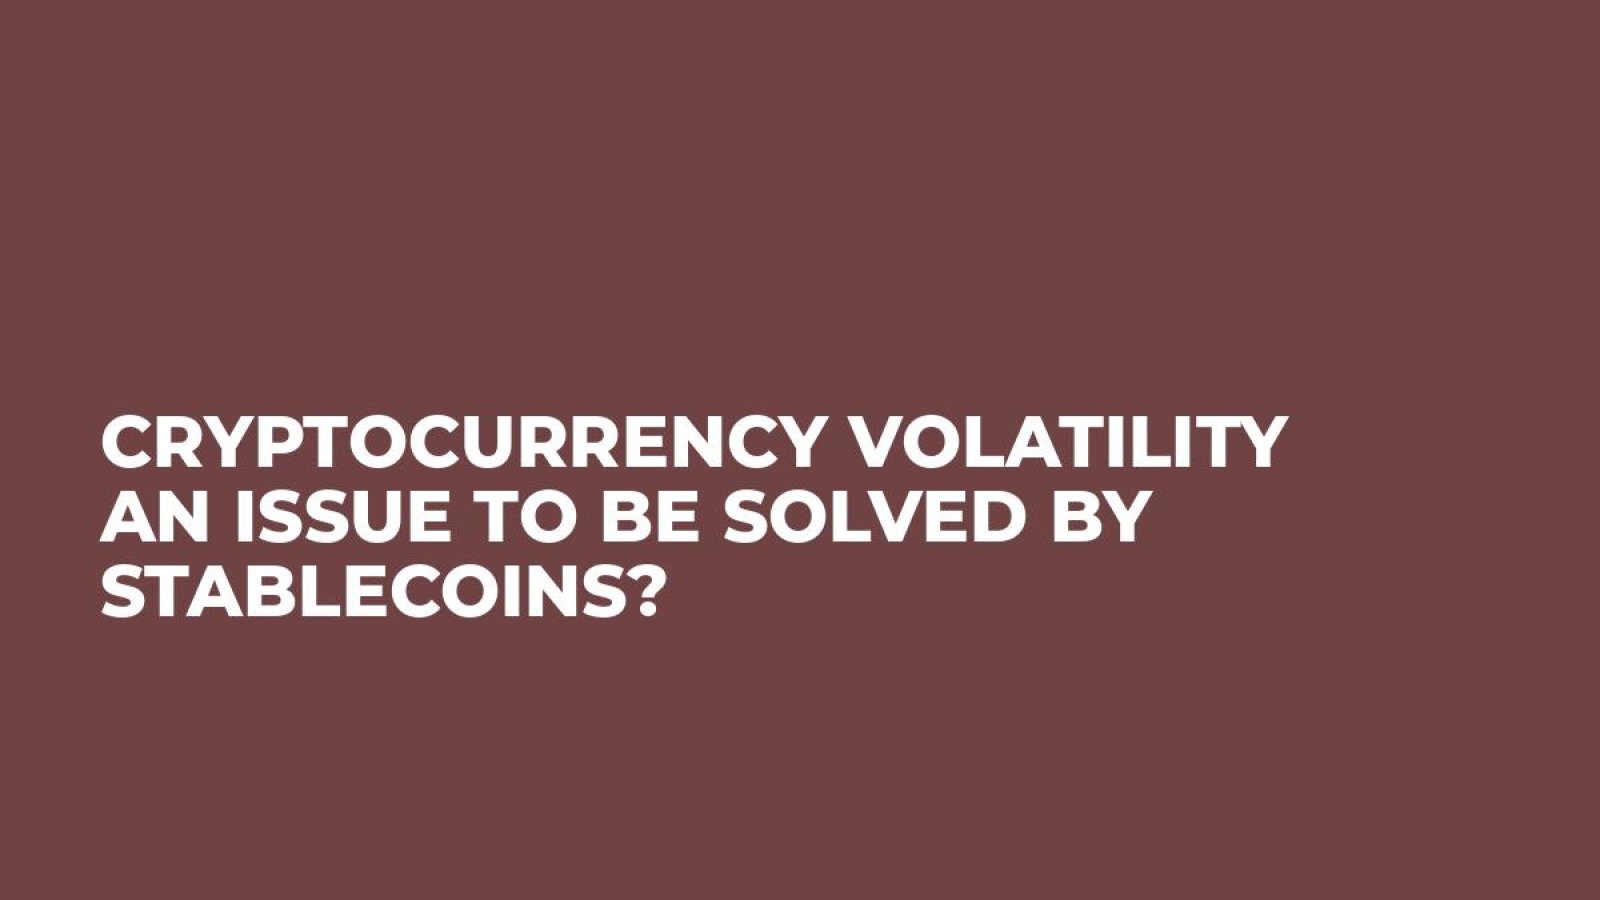 Cryptocurrency Volatility an Issue to Be Solved By Stablecoins?